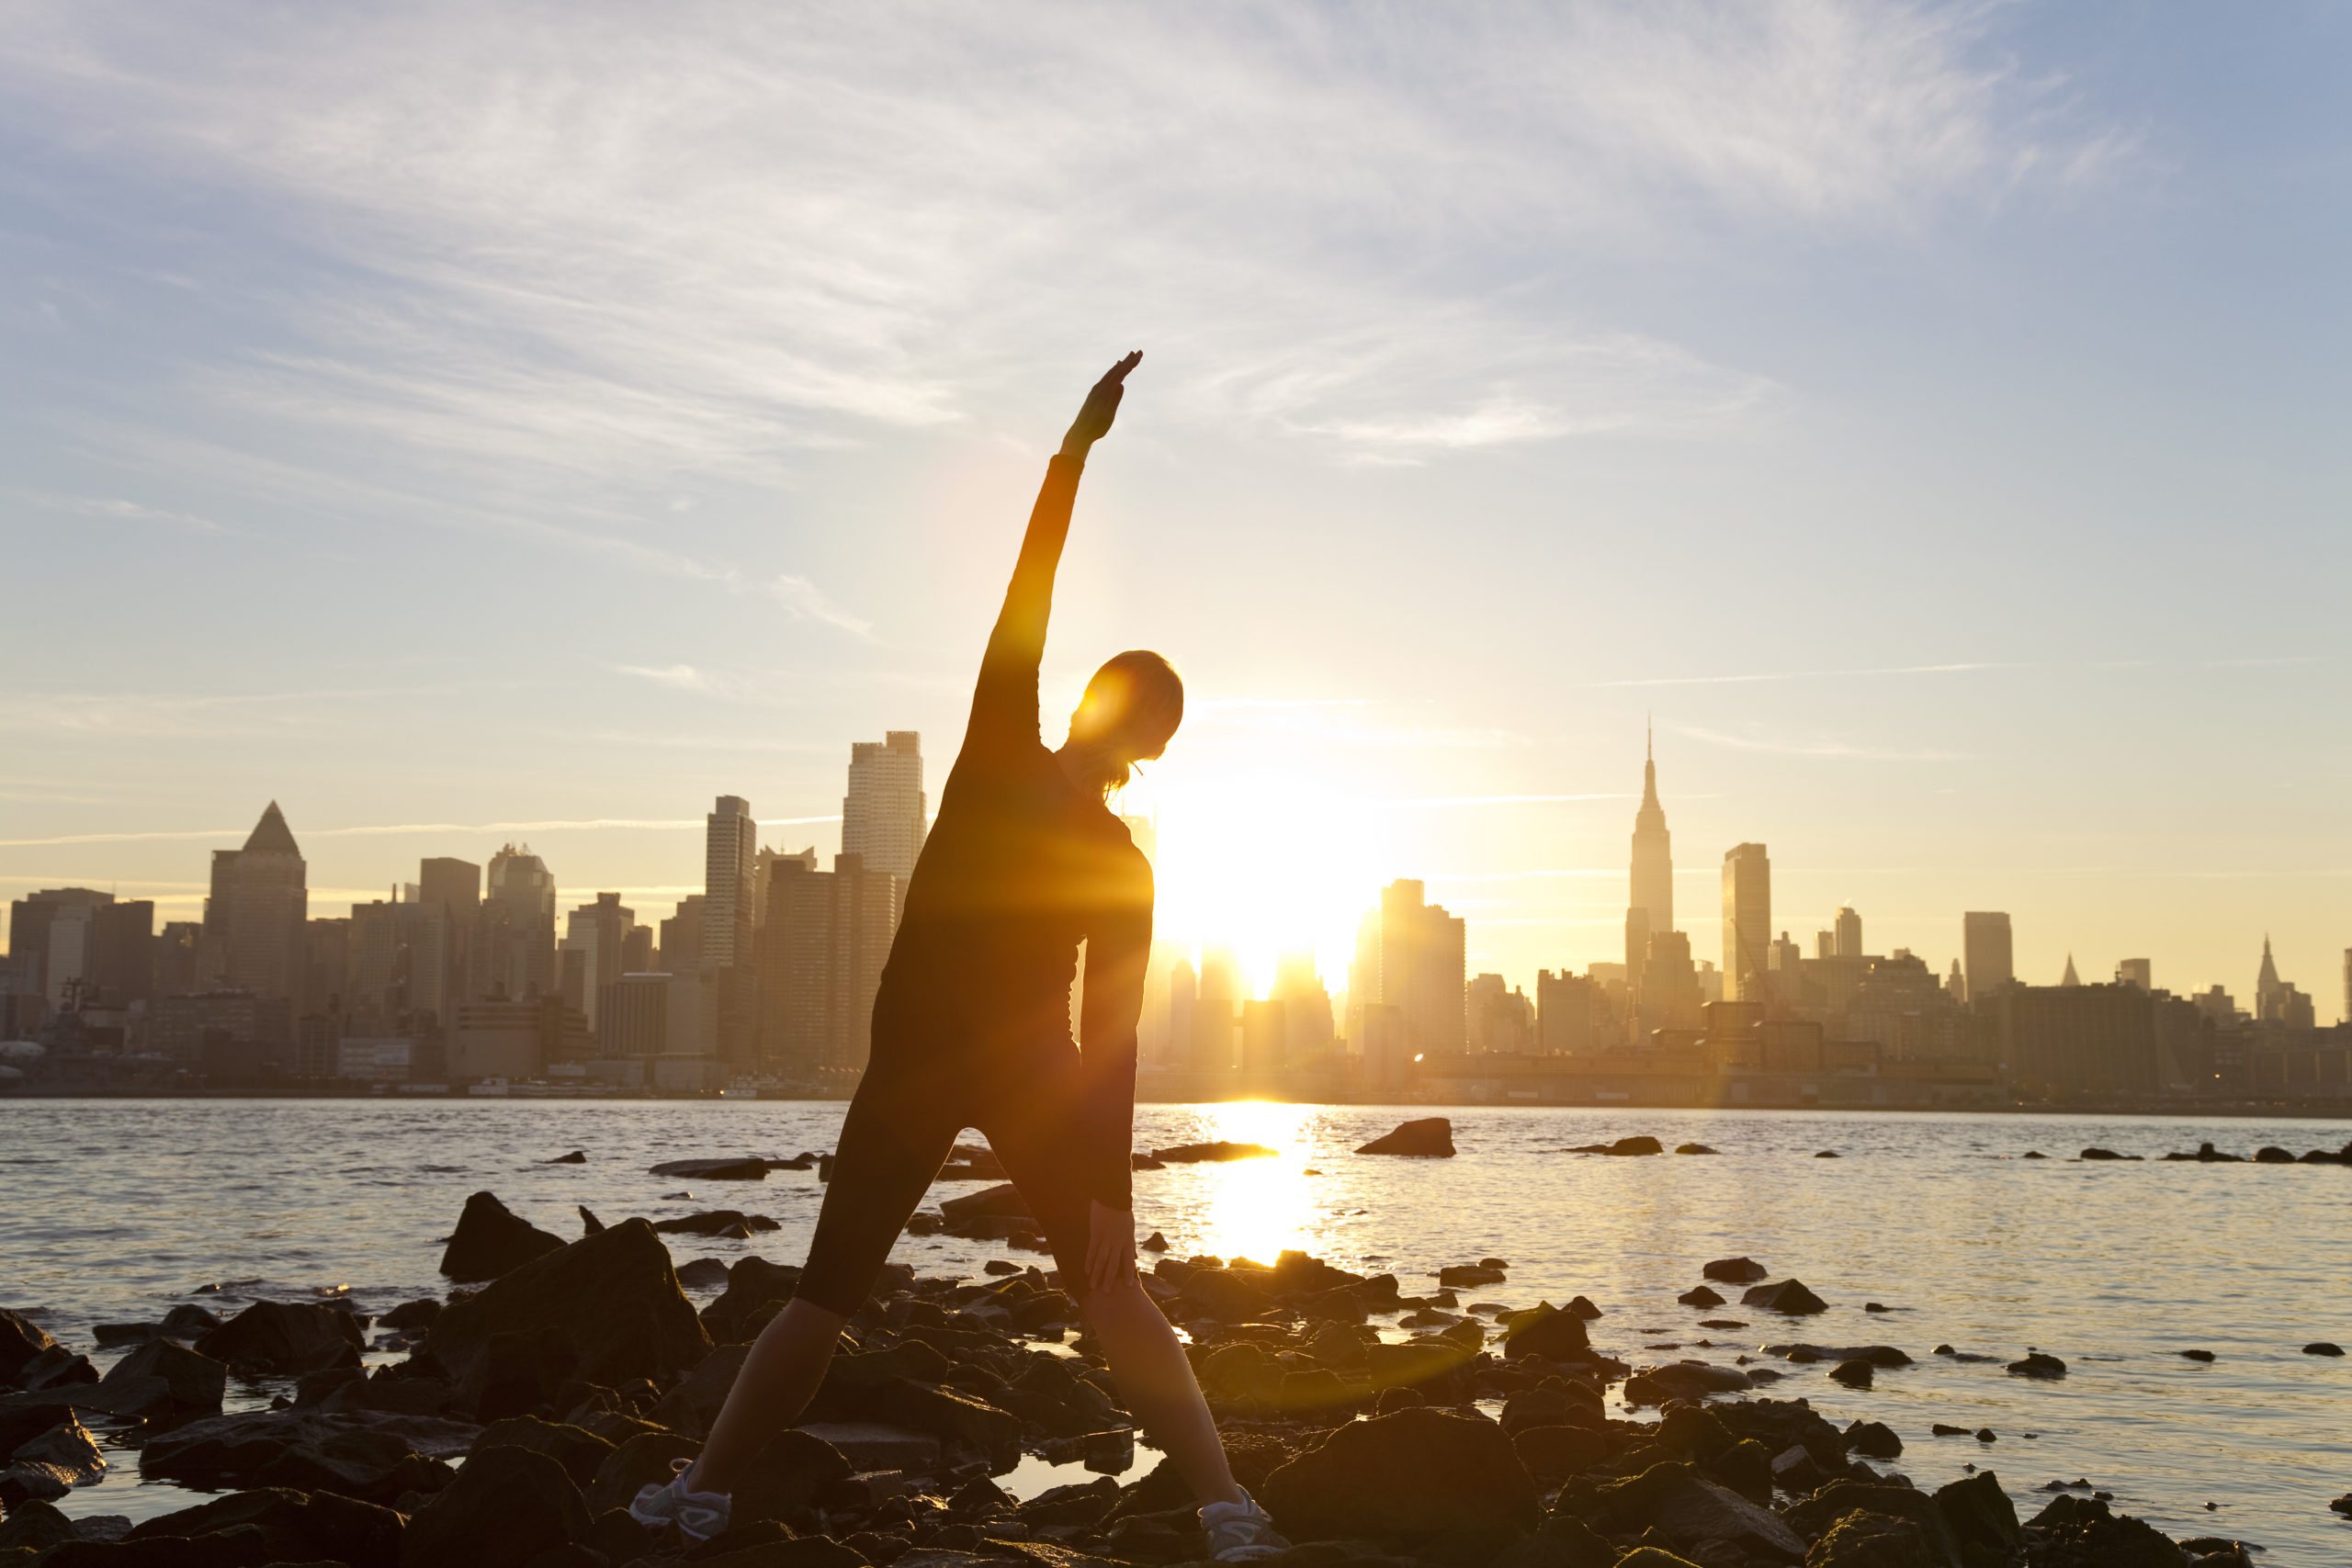 A woman runner stretching in a yoga position in front of the Manhattan skyline, New York City, United States of America, at early morning dawn sunrise